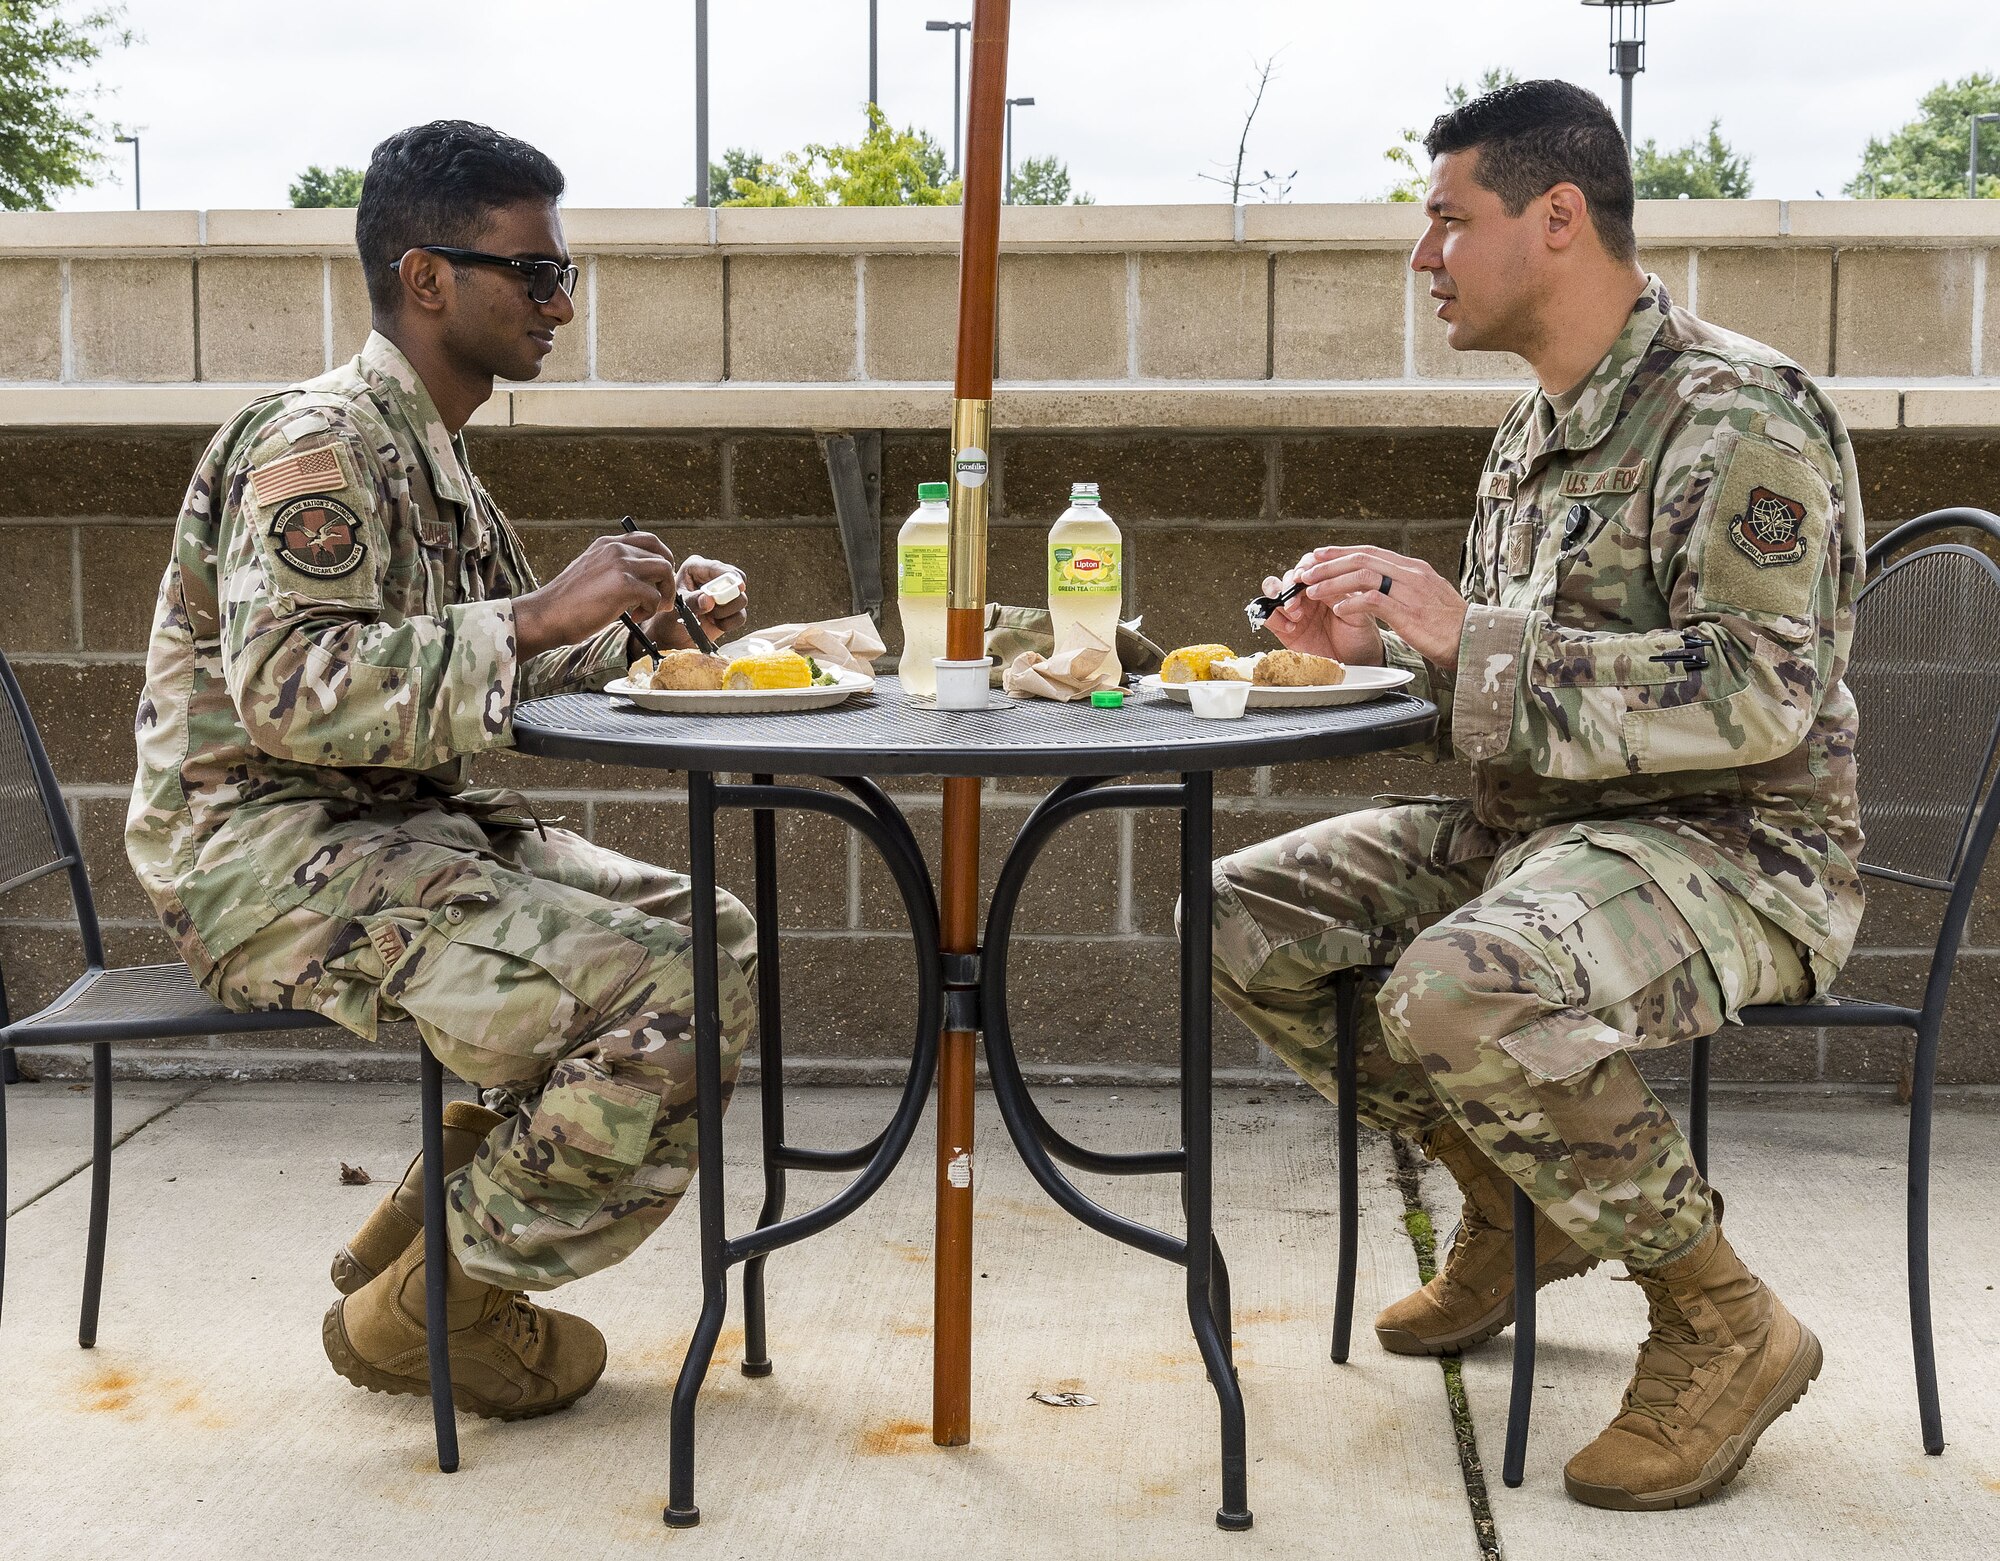 Staff Sgt. Yaspaul Rampersaud, left, 436th Operational Medical Readiness Squadron immunizations noncommissioned officer in charge, and Tech. Sgt. Flavio Porto, right, 436th OMRS medical services flight chief, eat lunch outside the Patterson Dining Facility on Dover Air Force Base, Delaware, Sept. 17, 2021. The DFAC held a picnic-style lunch commemorating the grand reopening, as well as a cake cutting celebrating the Air Force's 74th birthday. (U.S. Air Force photo by Roland Balik)